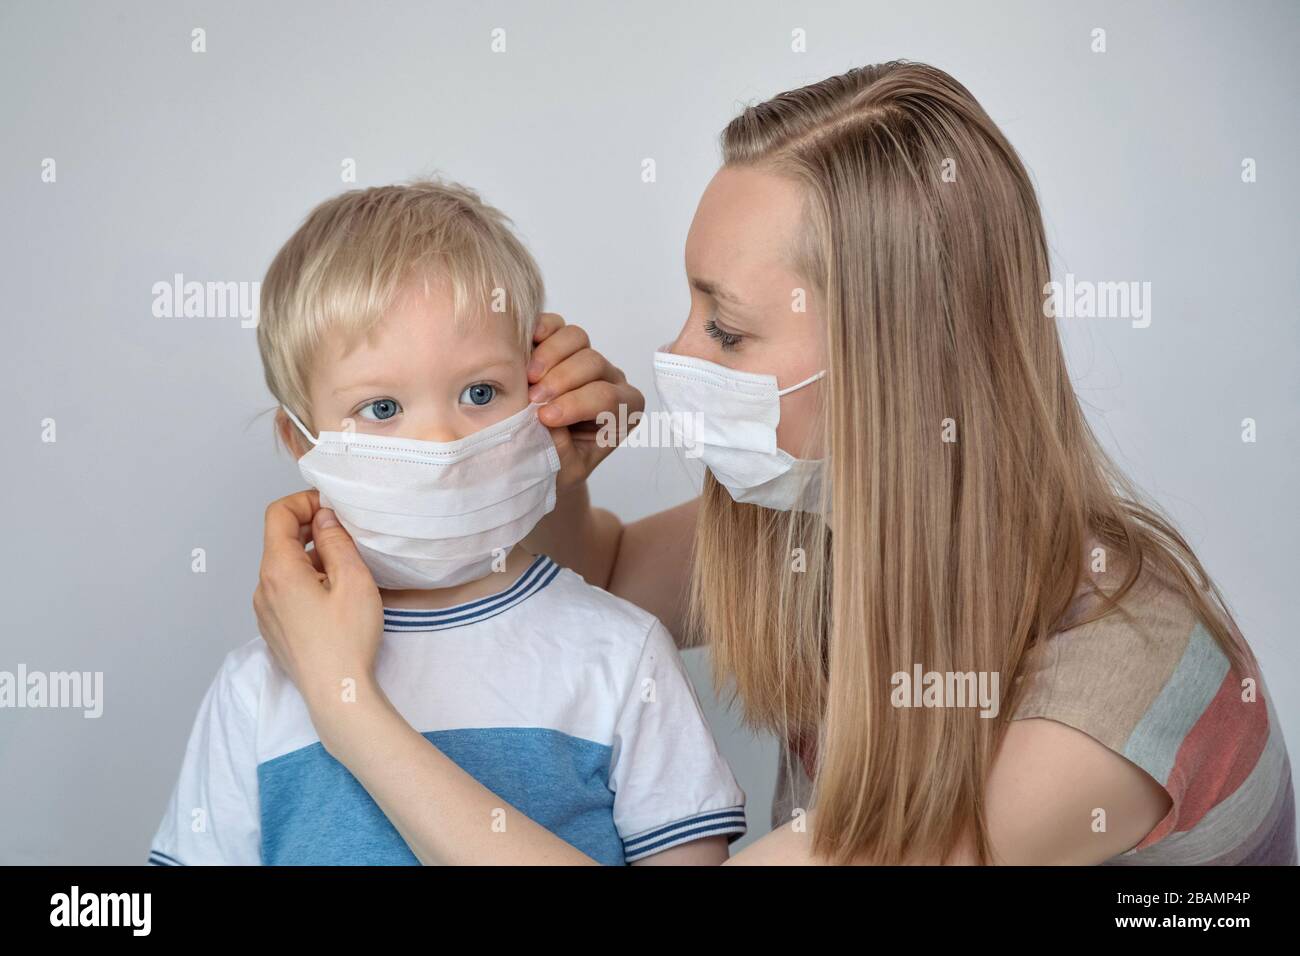 Woman with a medical mask puts it on a child Stock Photo